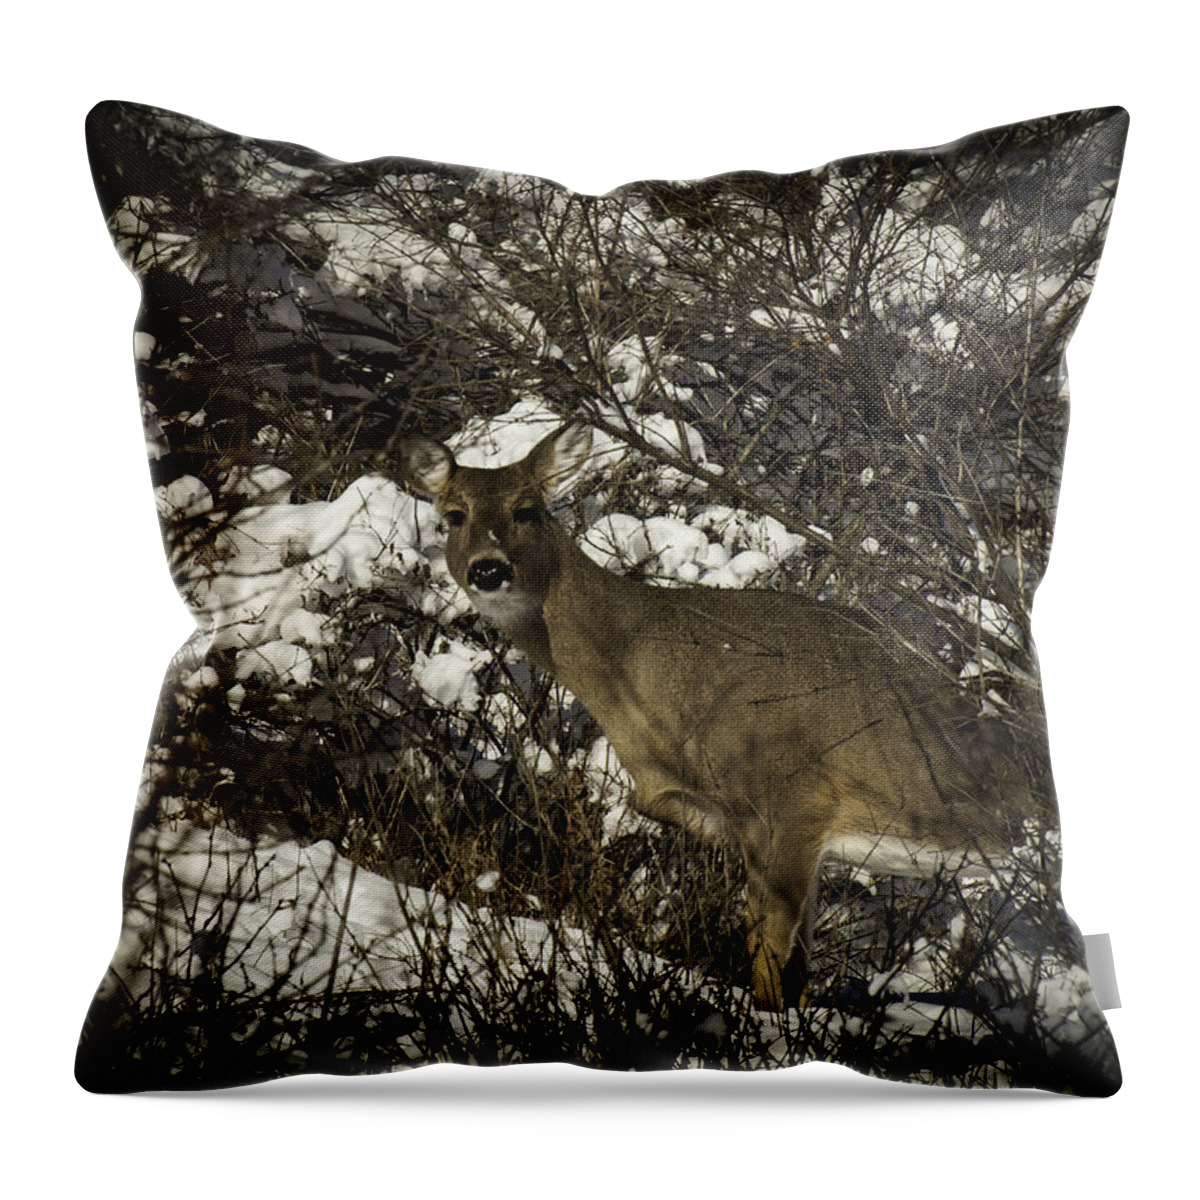 Whitetail Deer Throw Pillow featuring the photograph I See You by Thomas Young